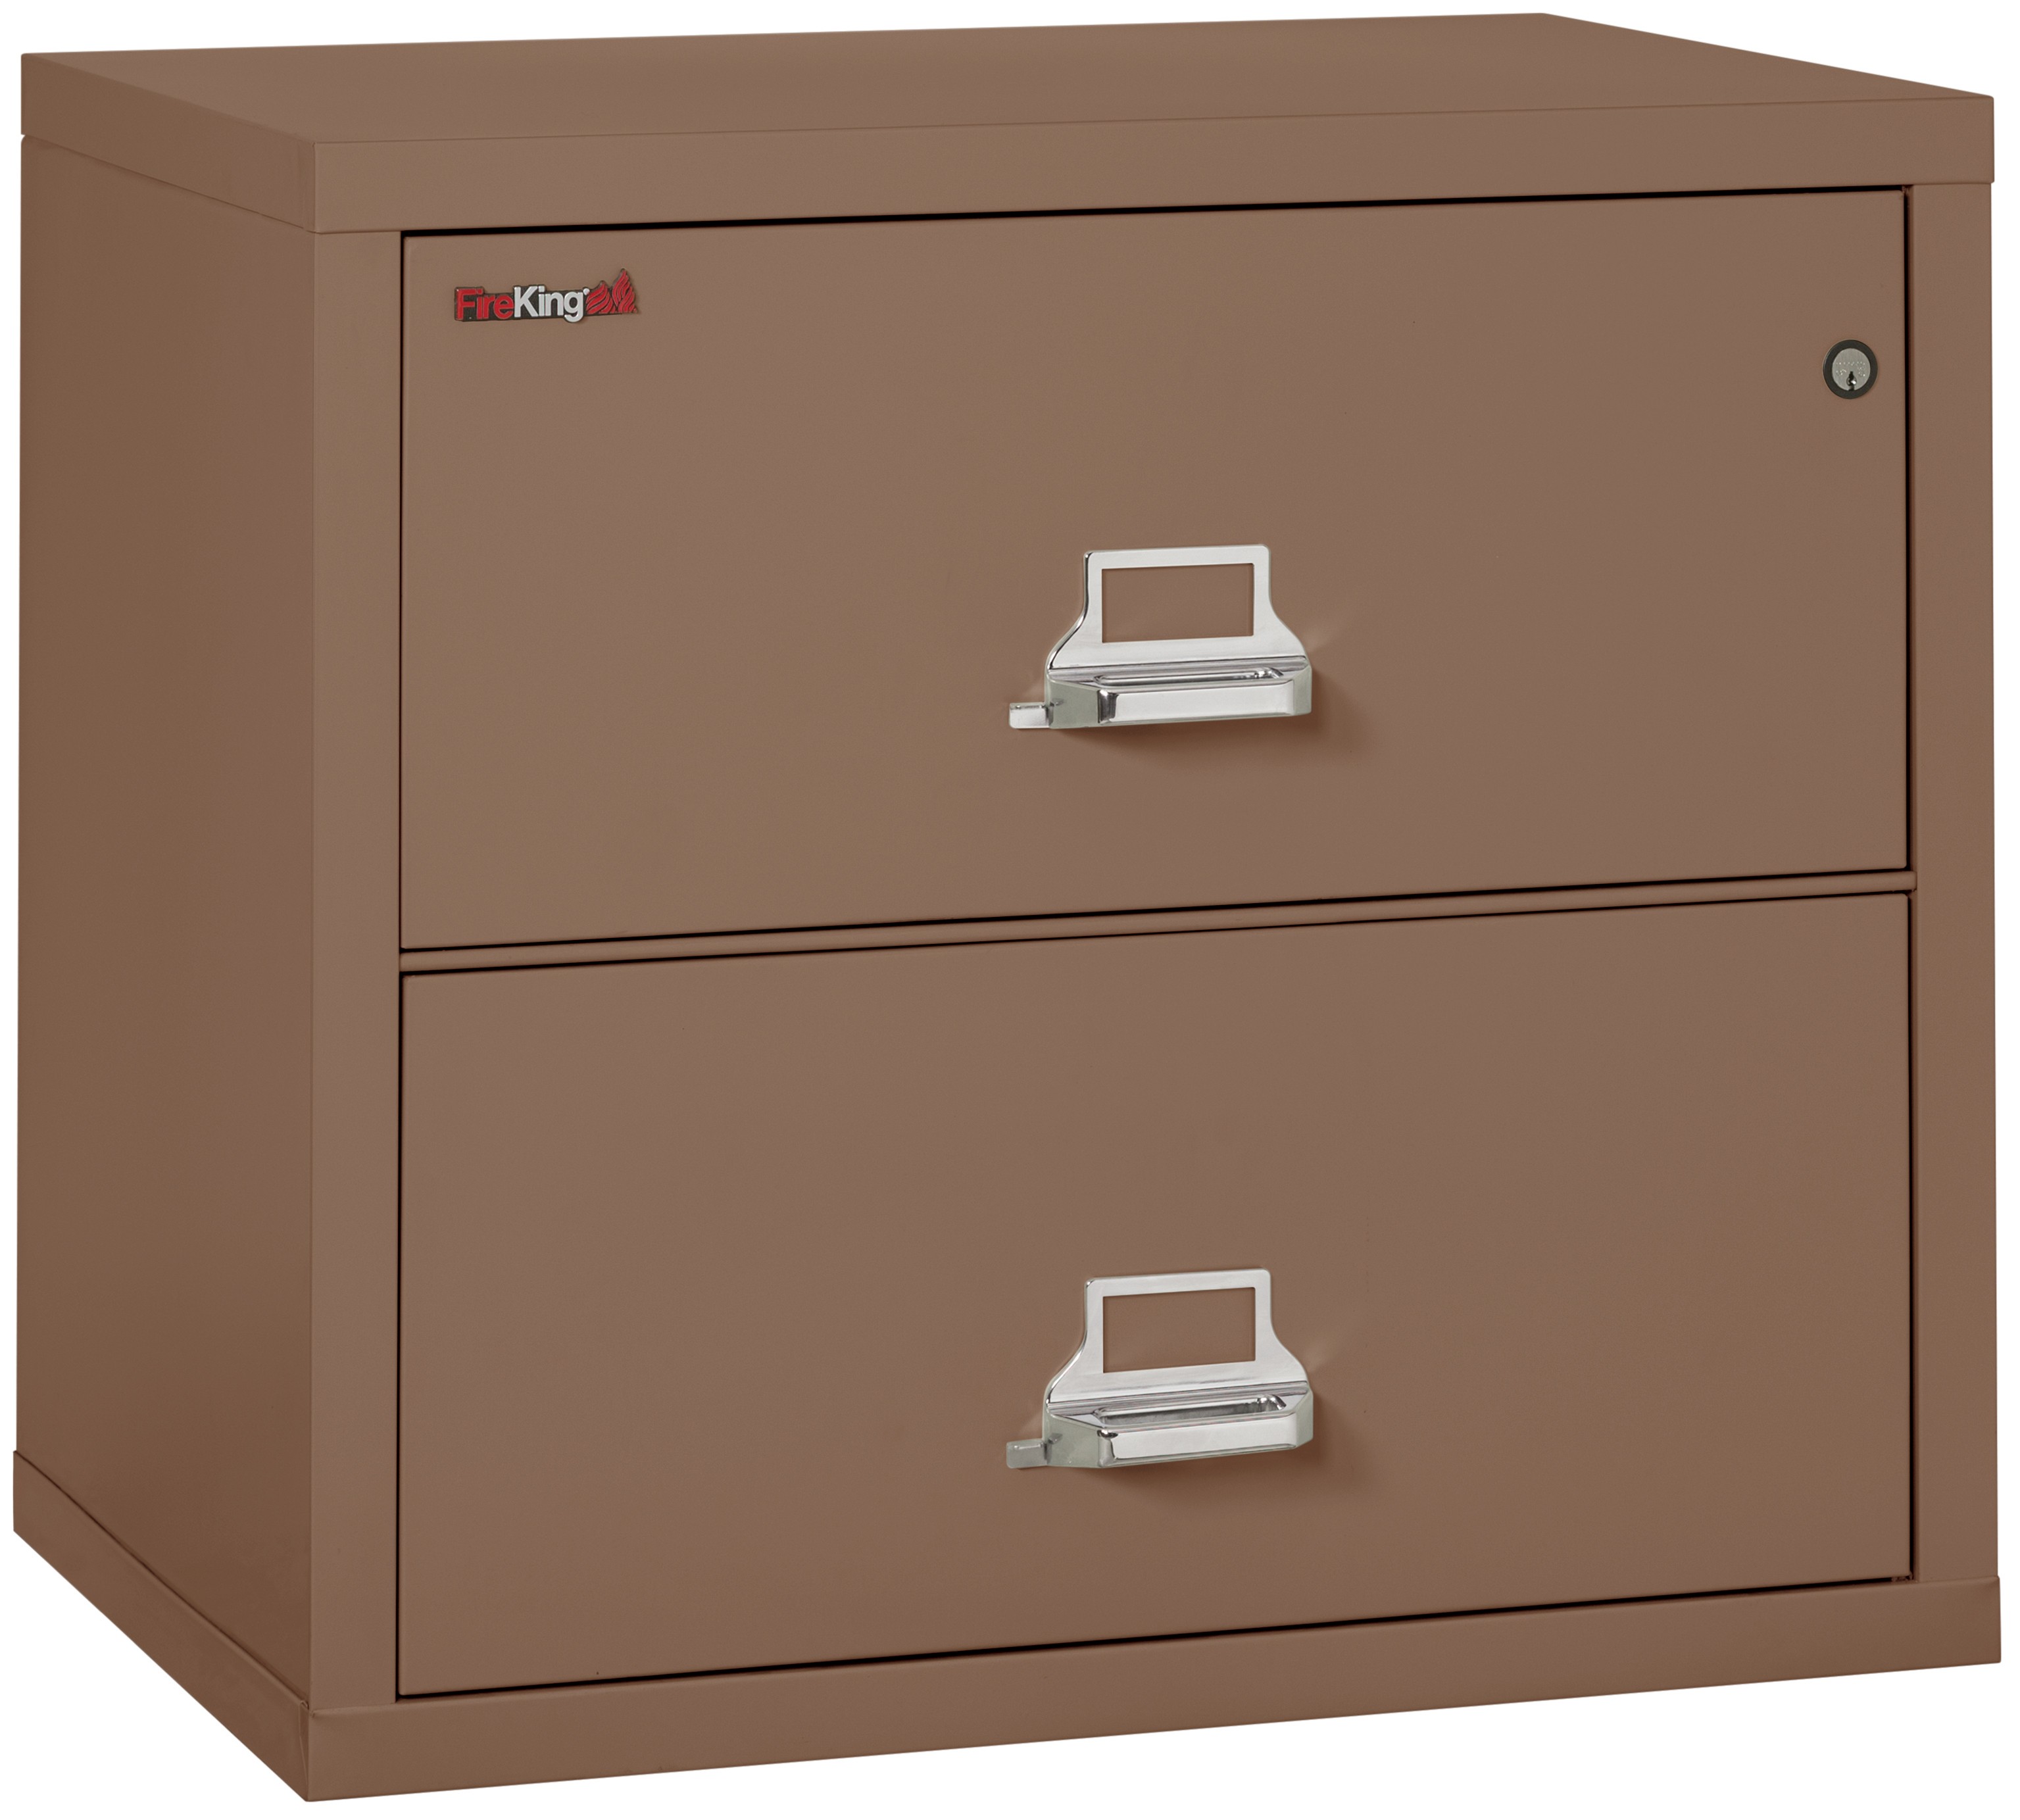 Fireking 2 Drawer 31" wide Classic Lateral fireproof File Cabinet-Tan - image 1 of 3